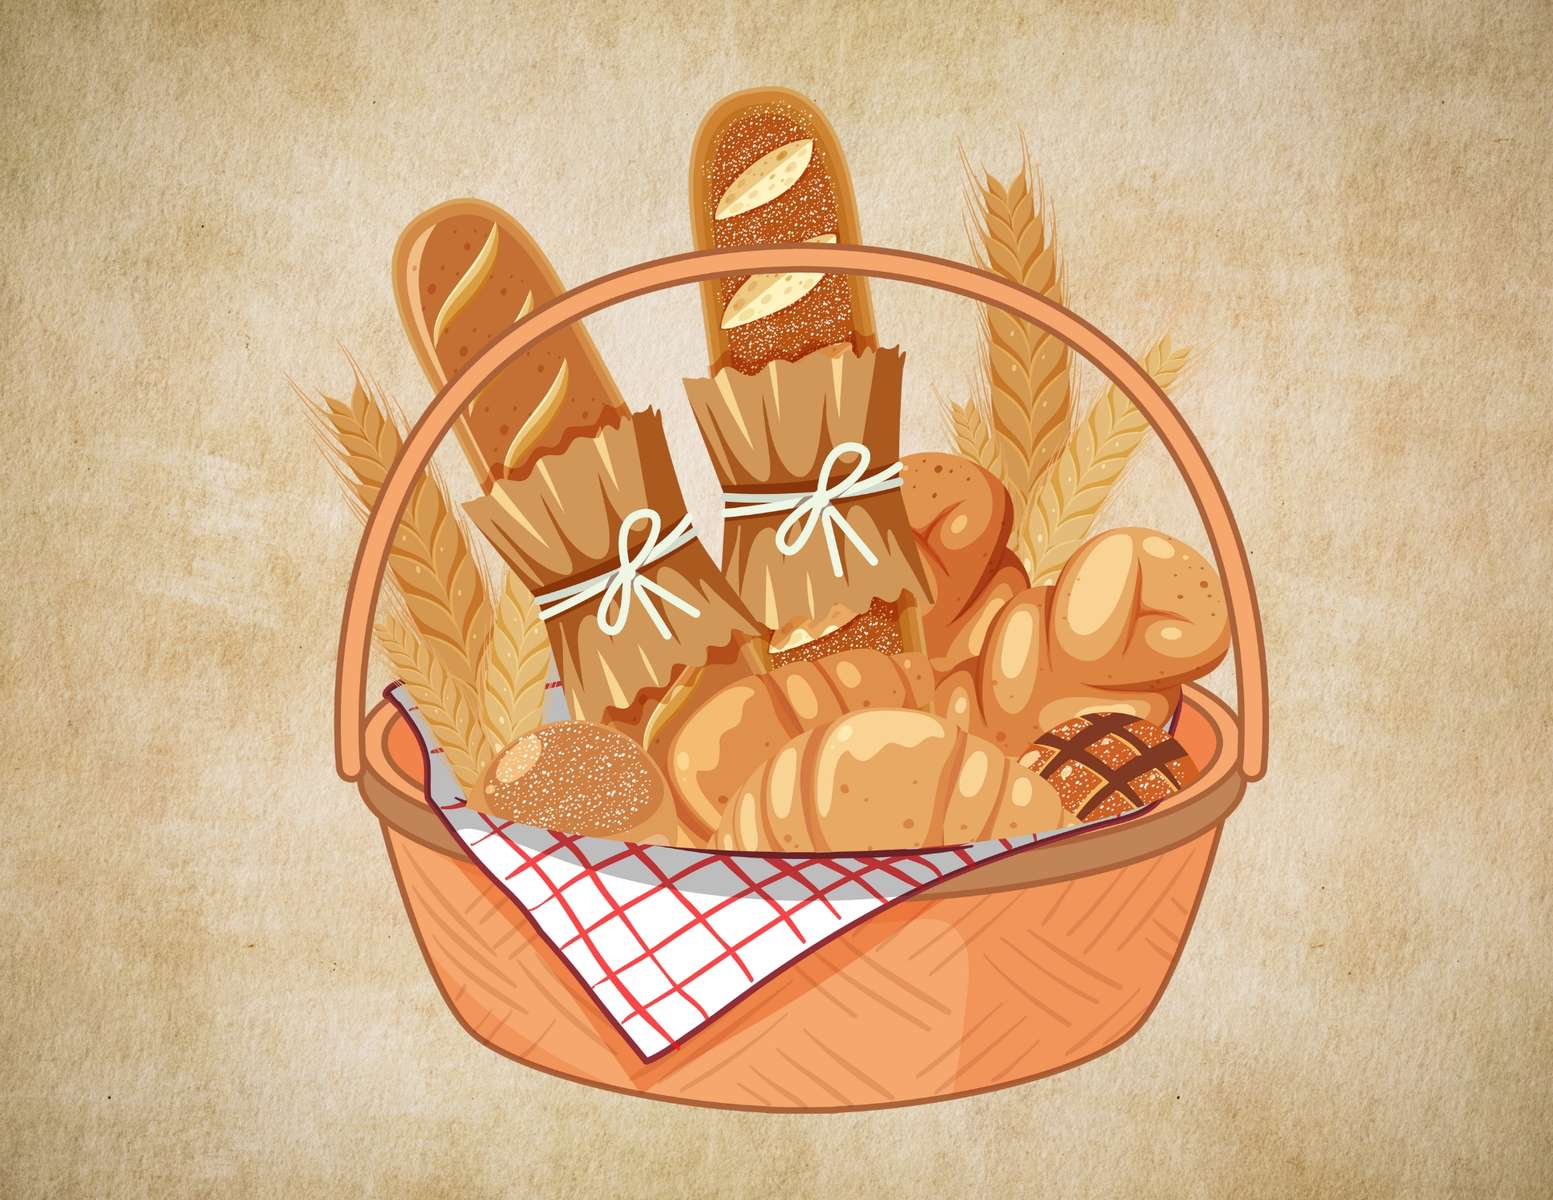 bread basket puzzle online from photo